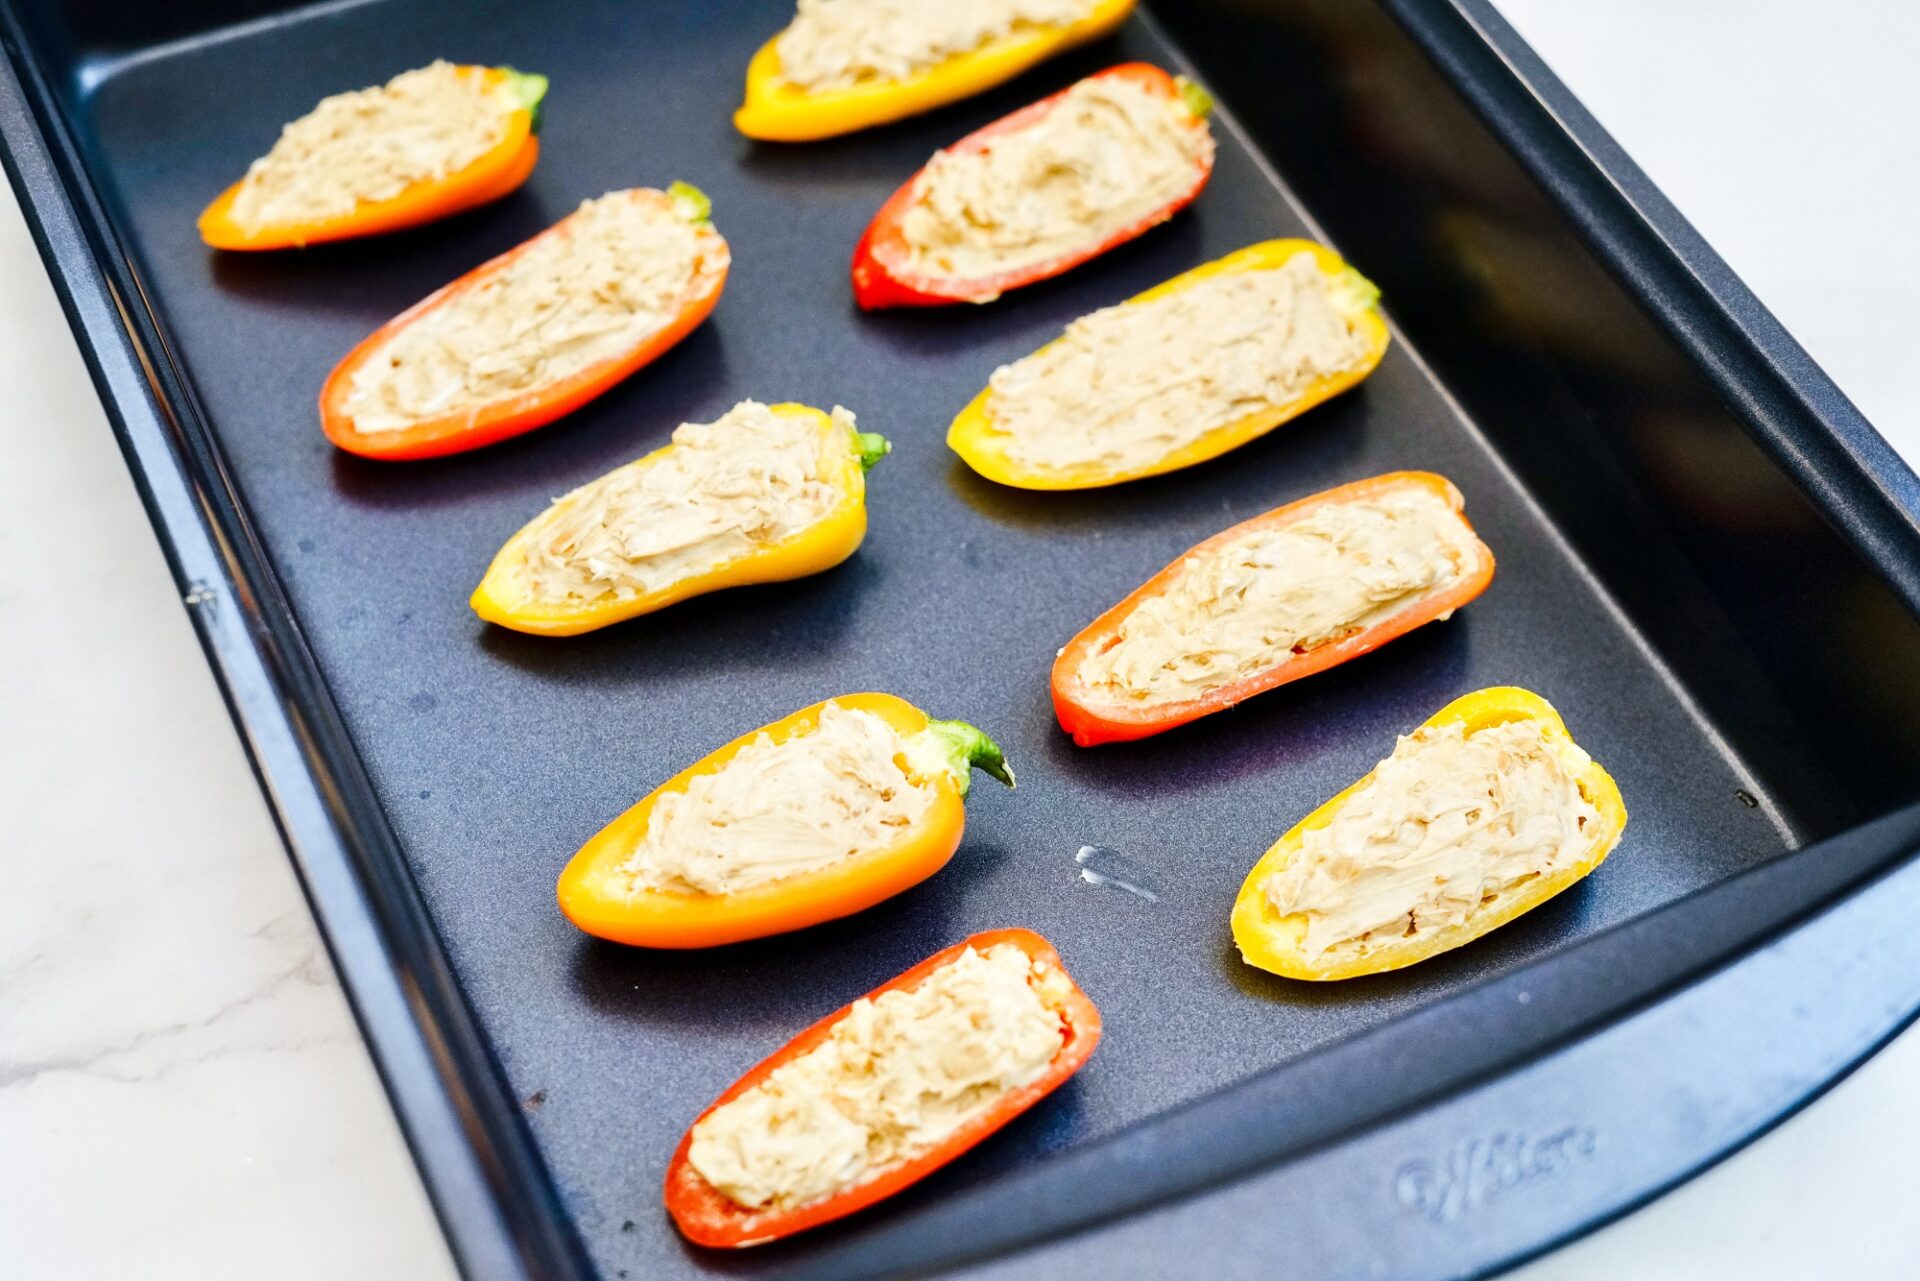 Unbaked stuffed peppers in a baking dish.